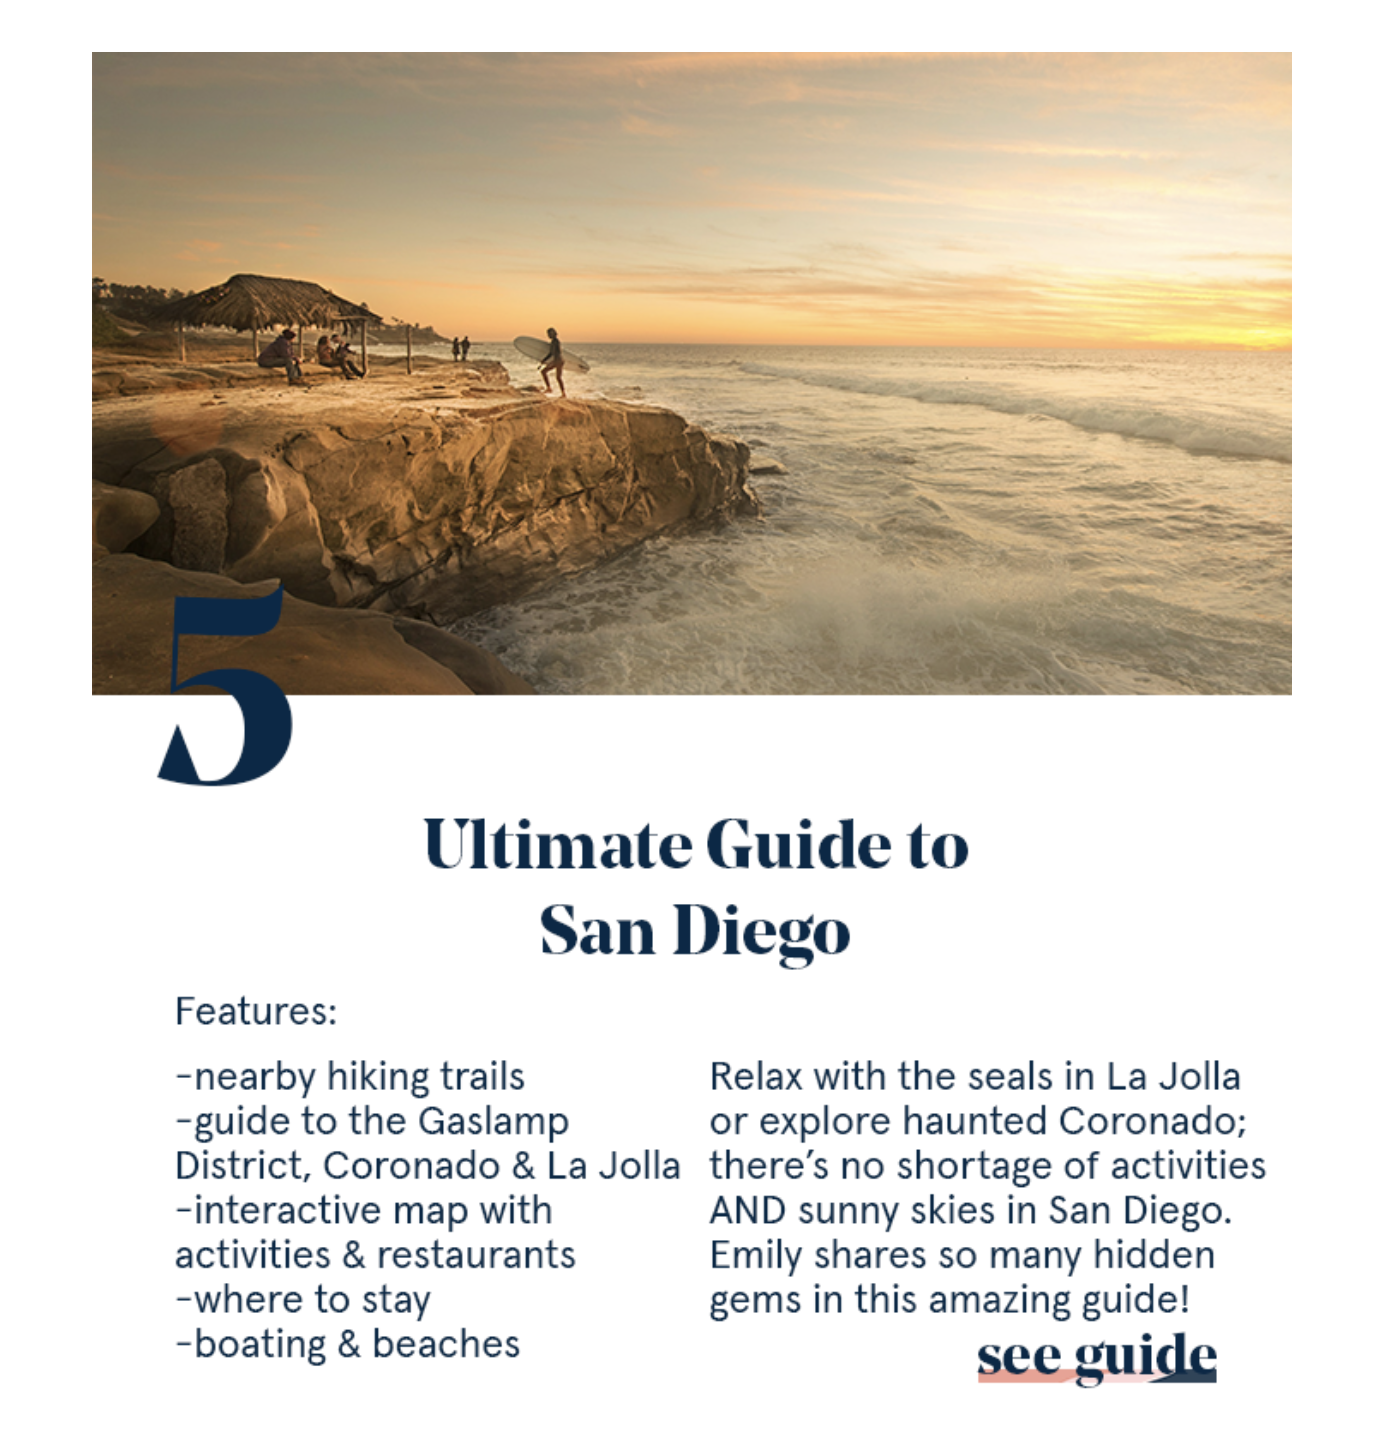 San Diego Travel Guide